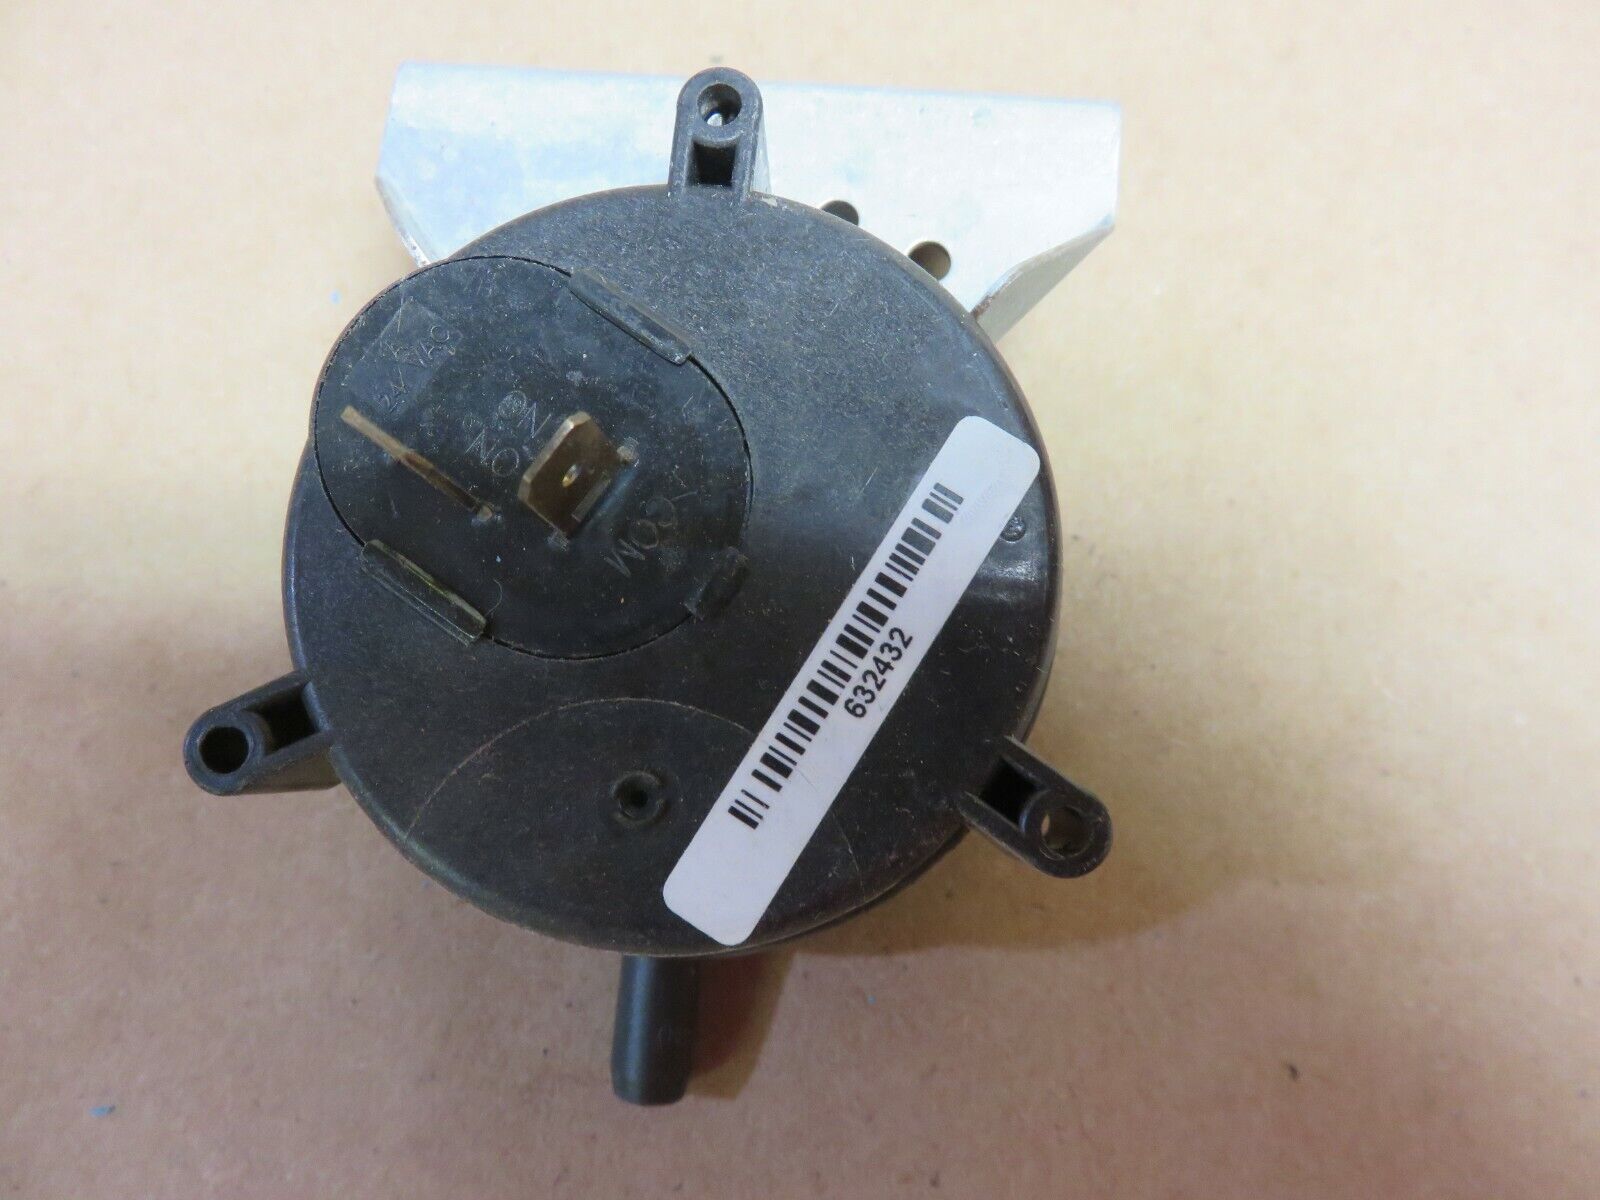  Nordyne Gas Furnace Pressure Switch Part# 632432